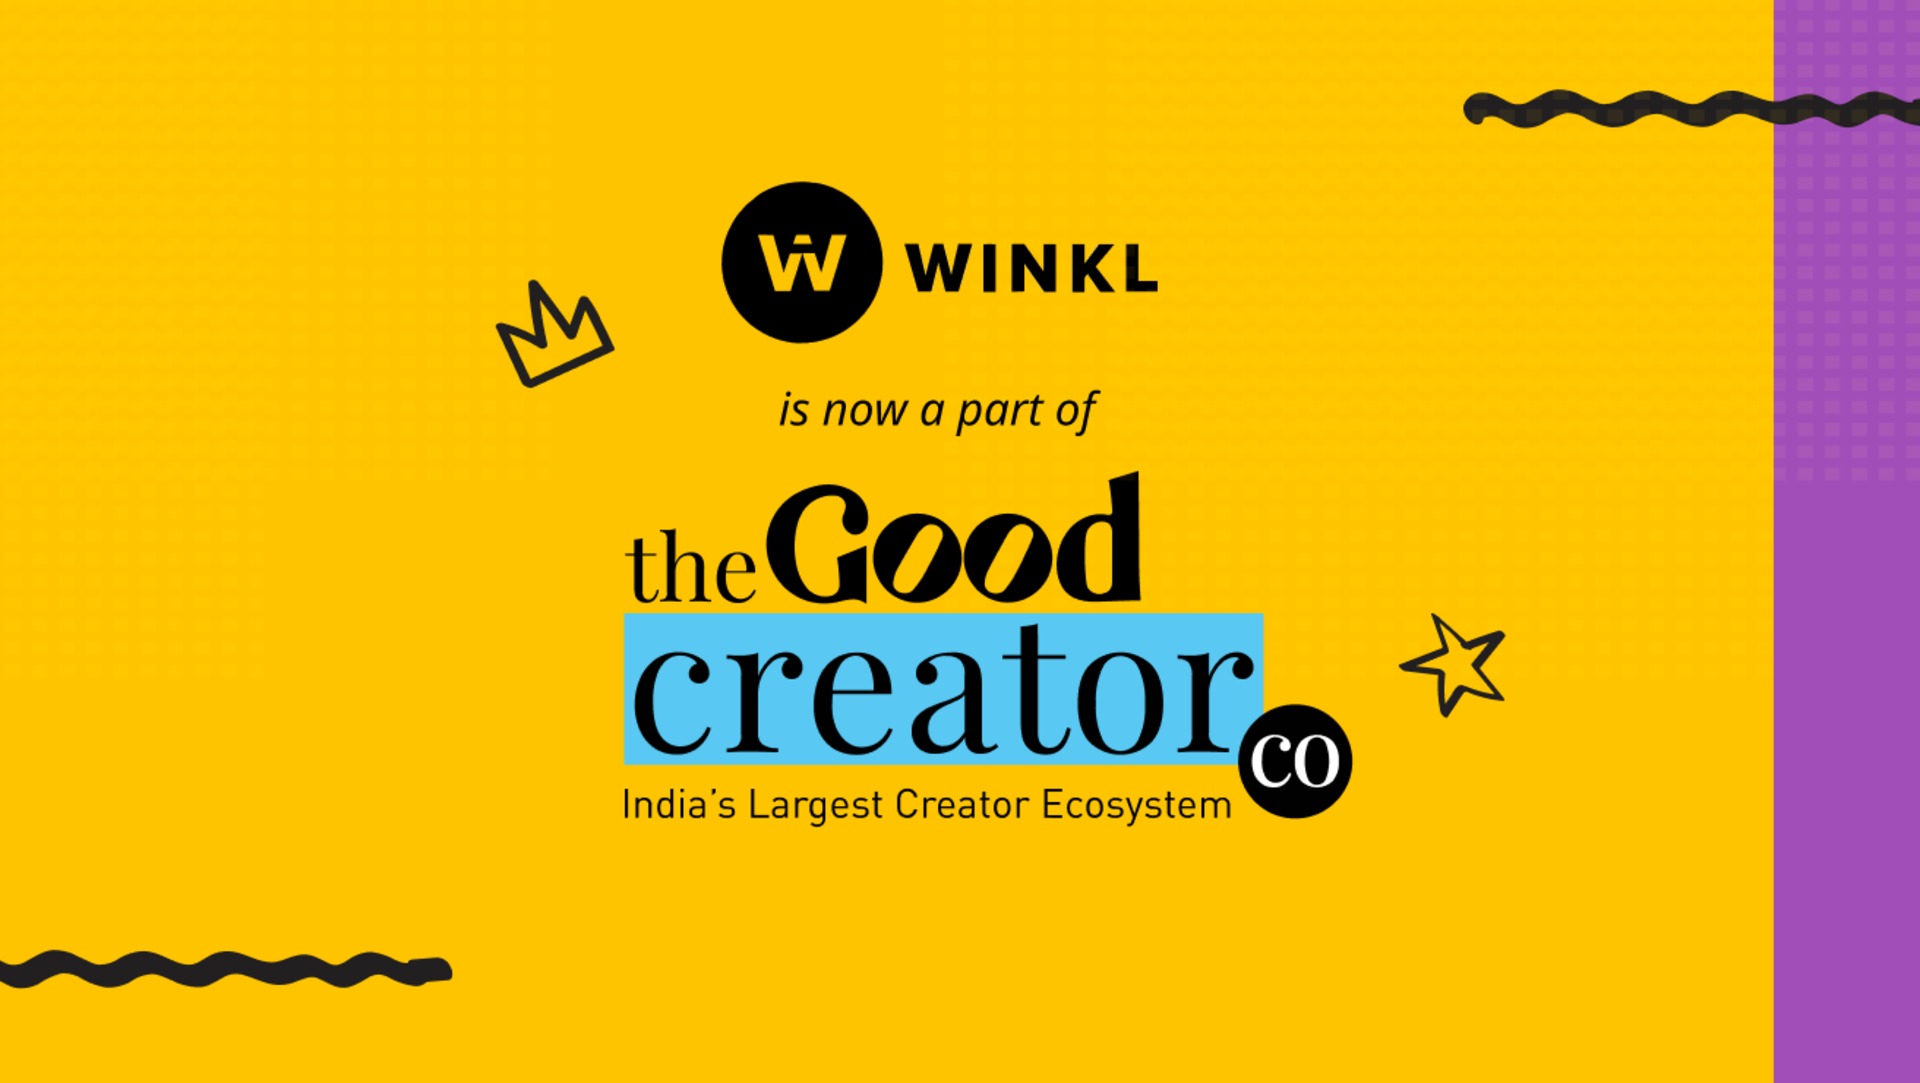 Winkl is now a part of The Good Creator Co image